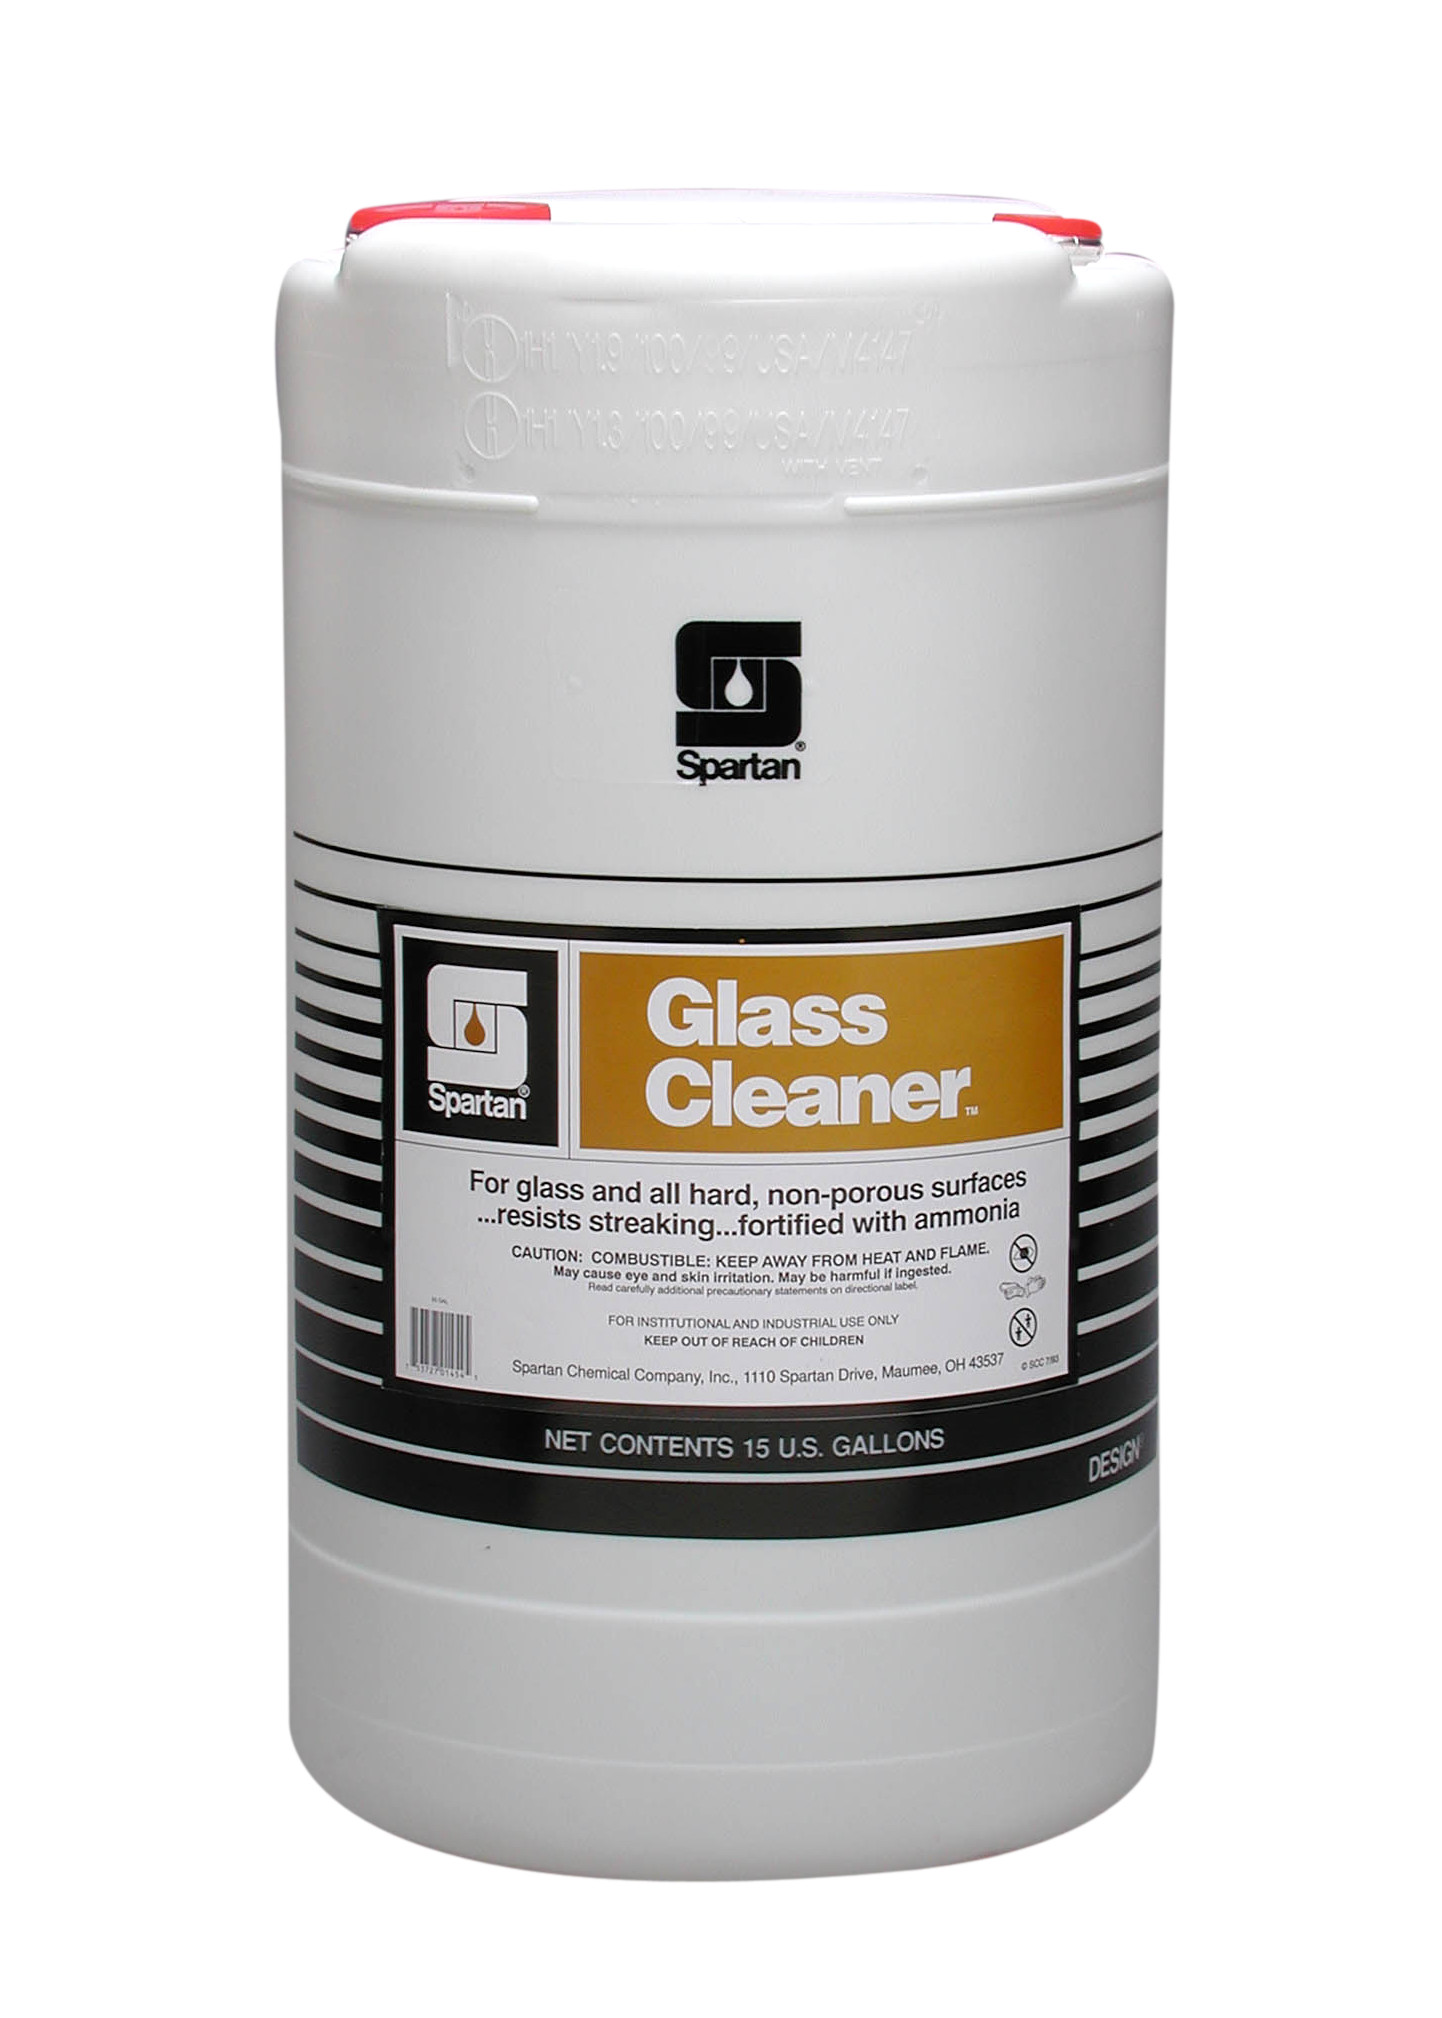 Spartan Chemical Company Glass Cleaner, 15 GAL DRUM